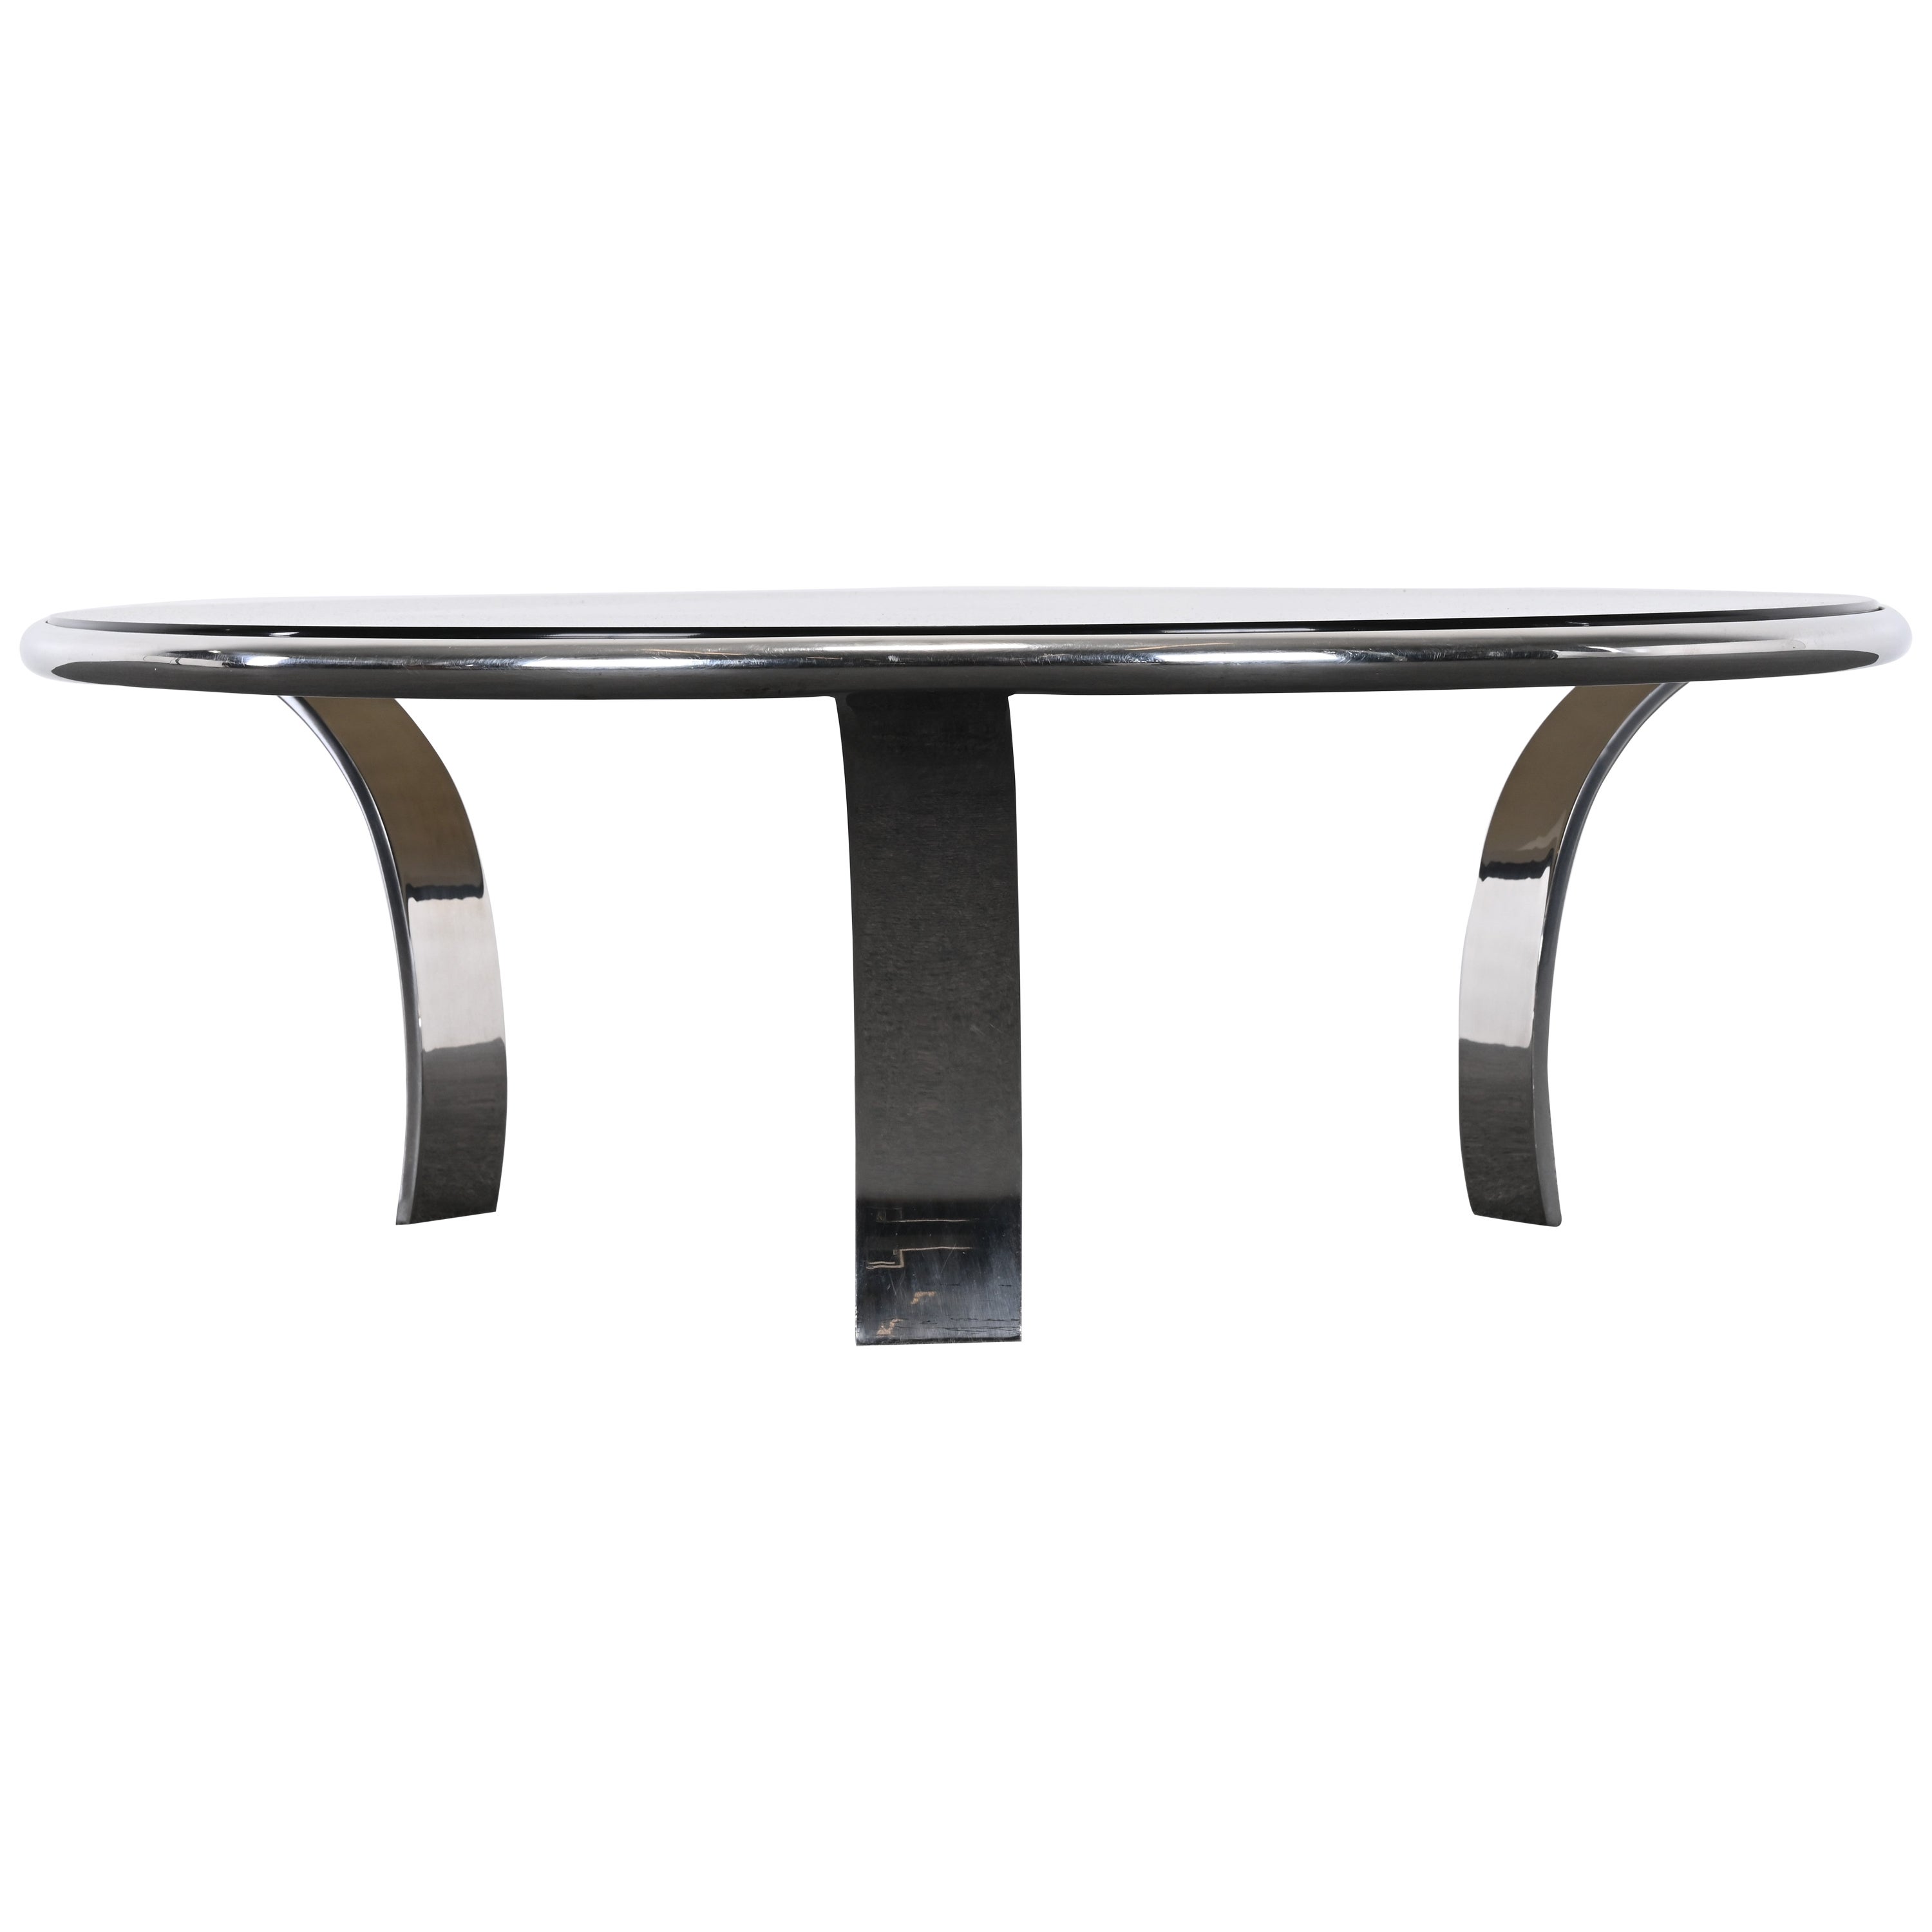 Stainless Steel Coffee Table by Steelcase Designed by Gardner Leaver, 1970s For Sale